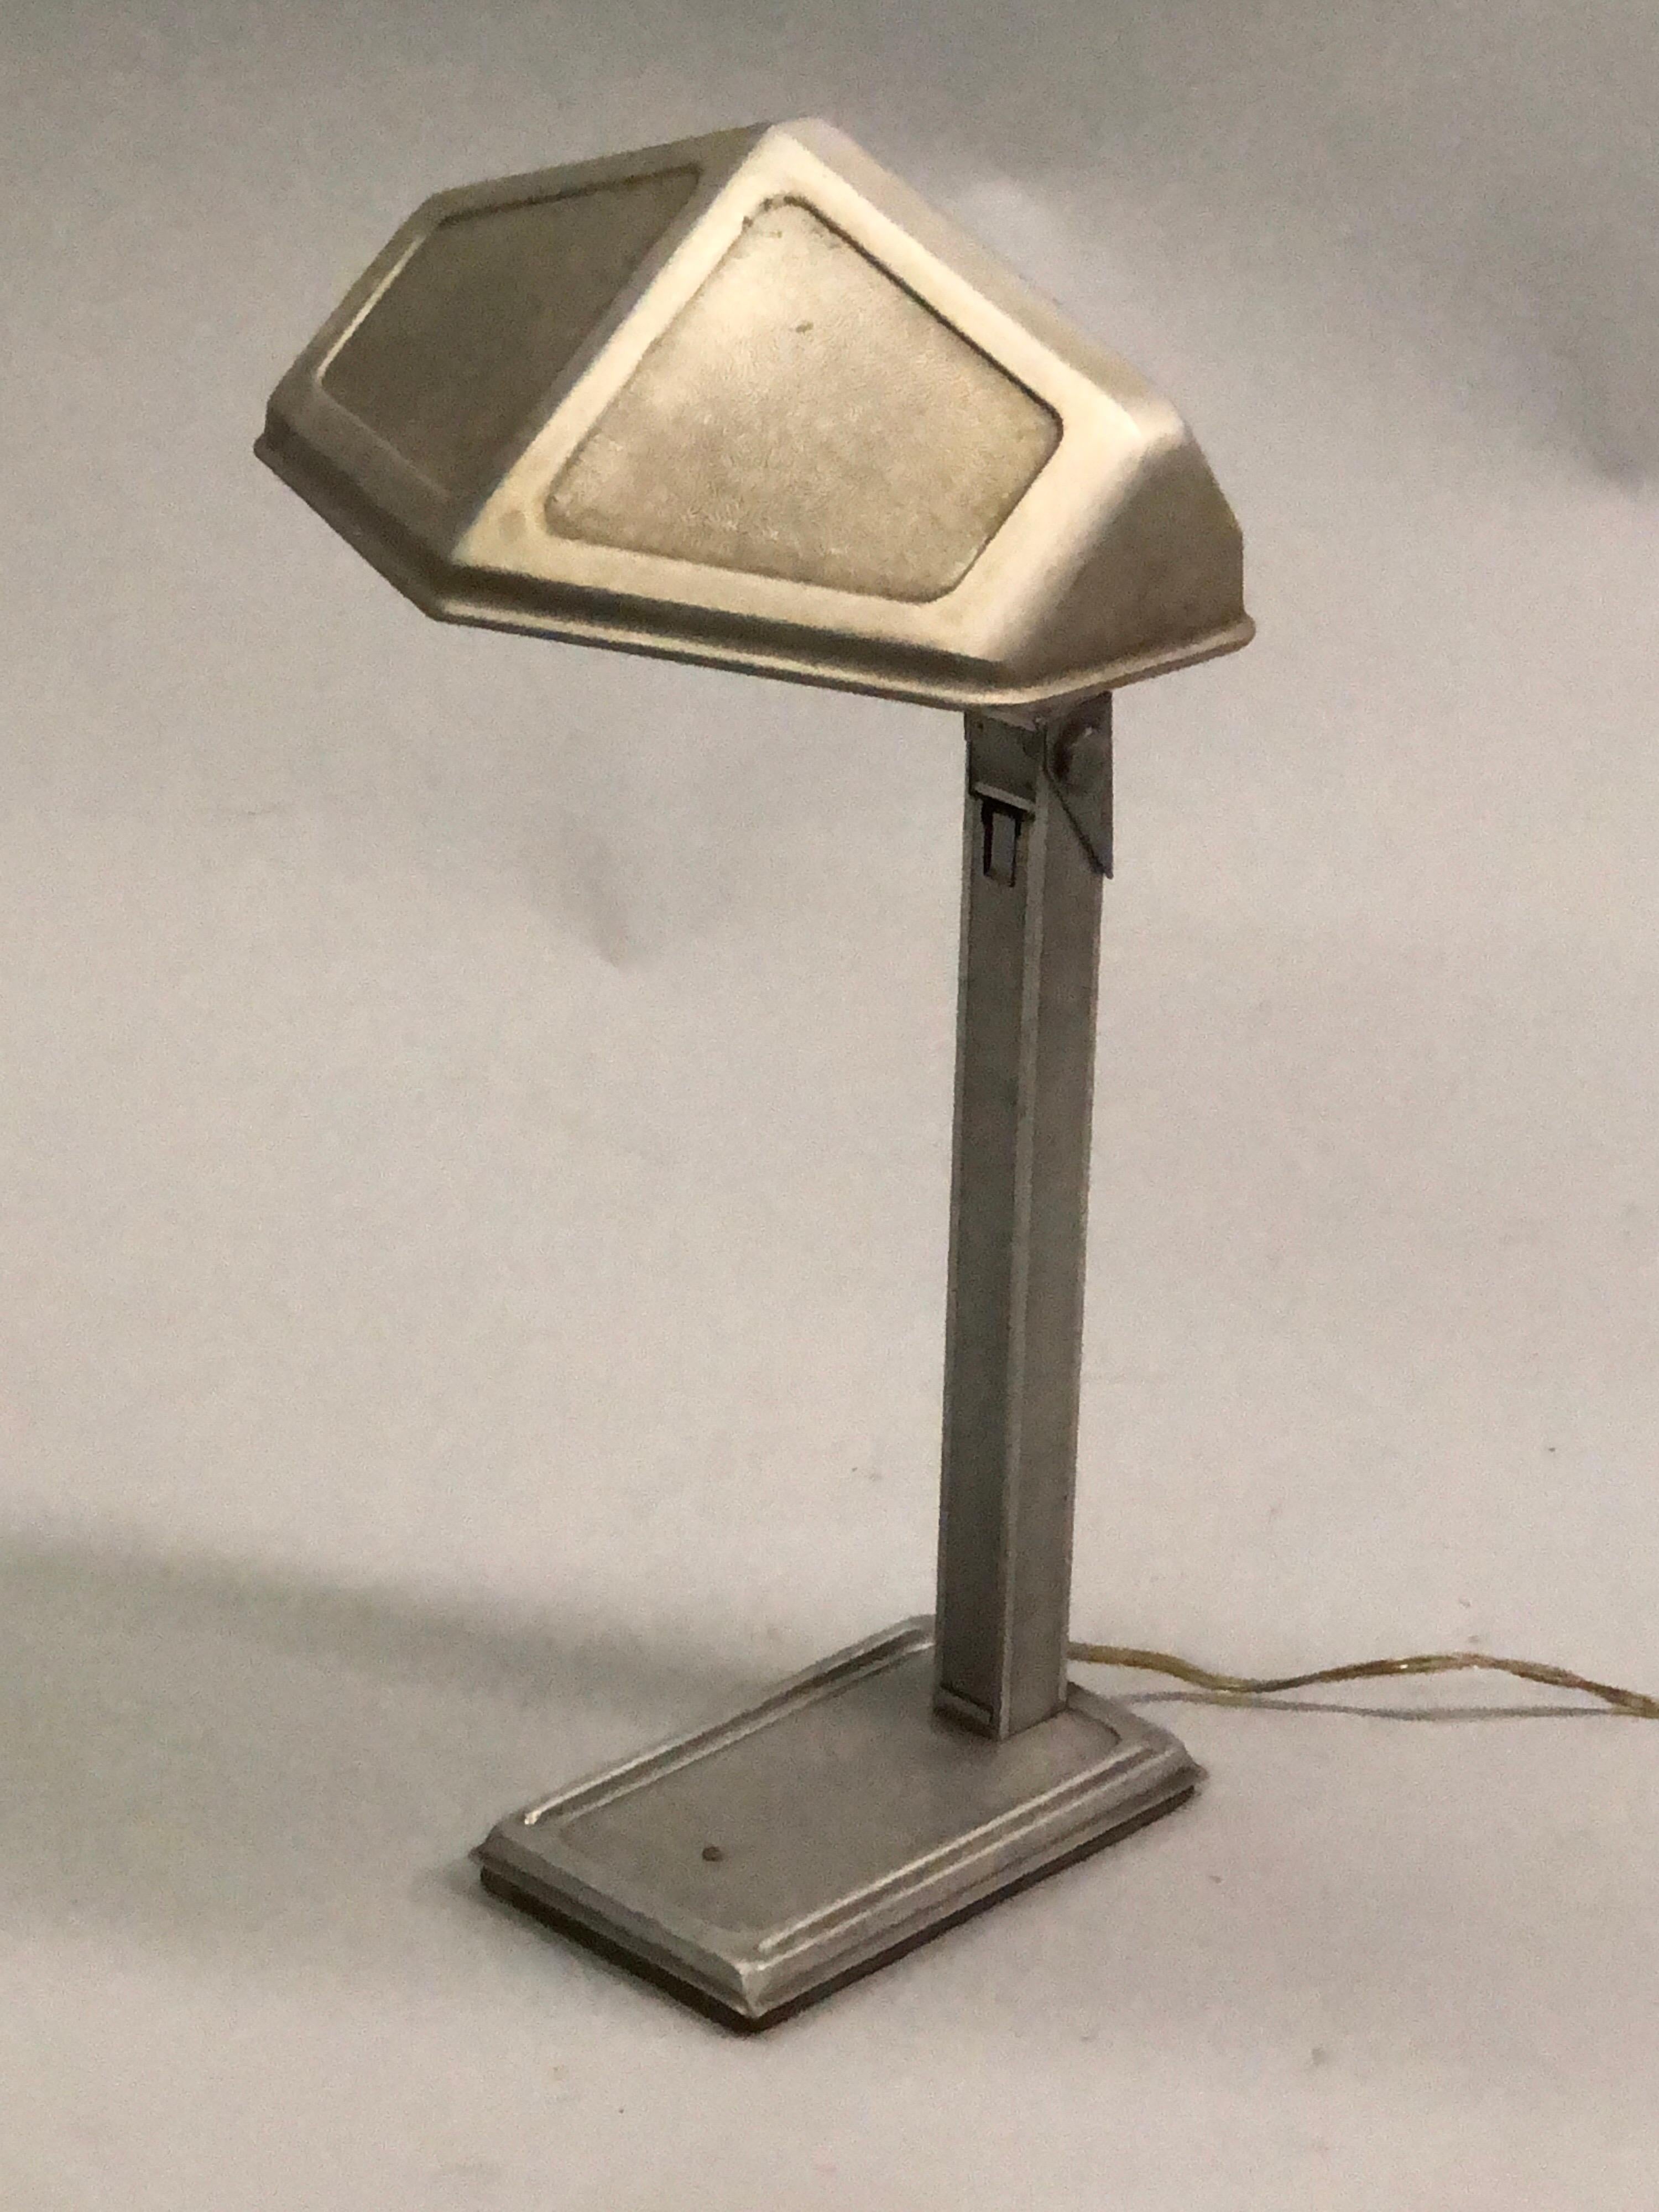 Mid-Century Modern Pair of French Early Modern Adjustable Aluminum Table/Desk Lamps by Pirette 1930 For Sale